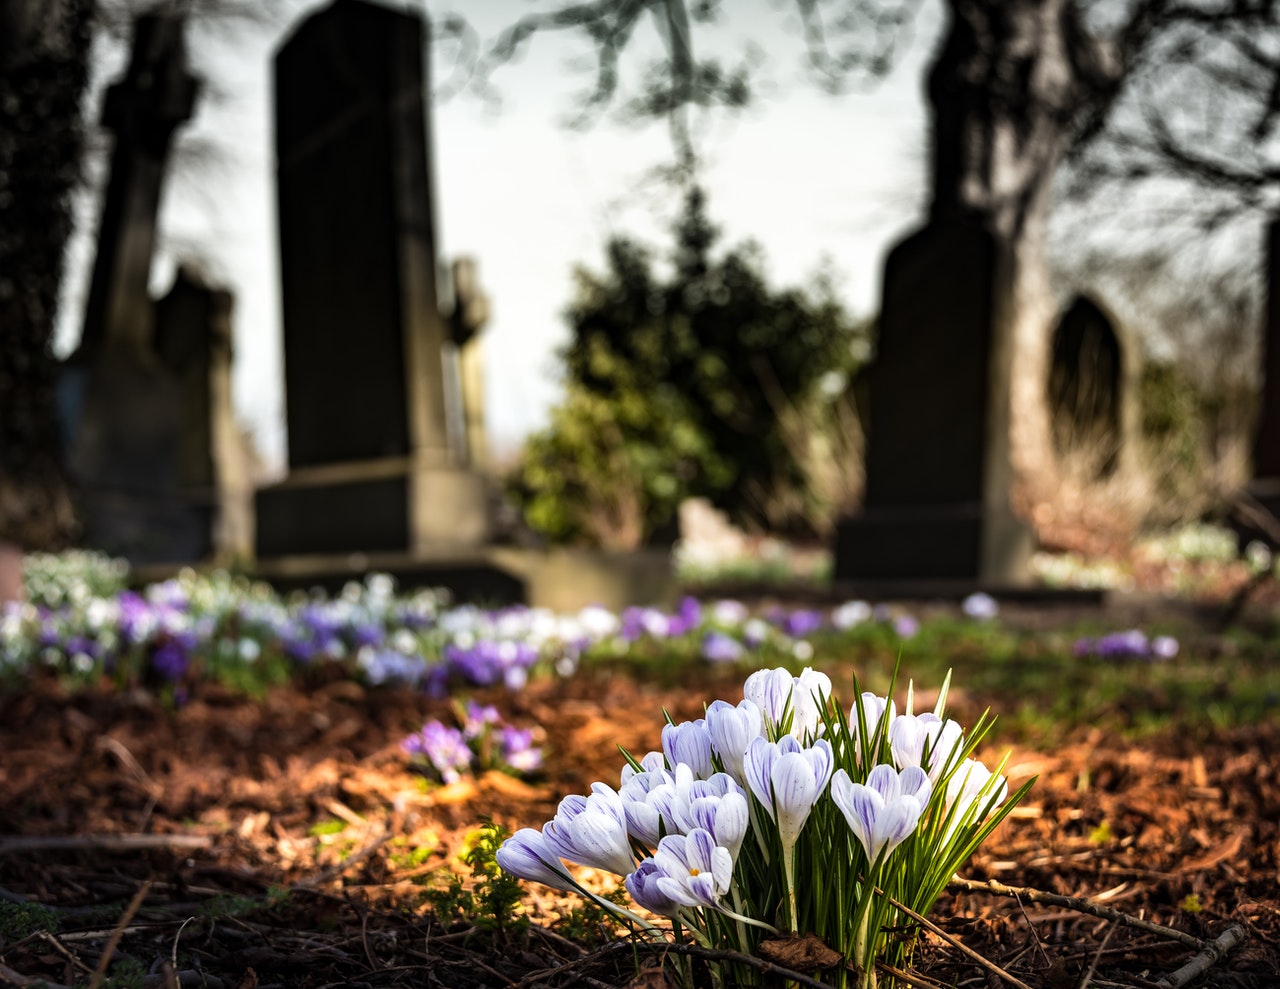 Photo by Pixabay: https://www.pexels.com/photo/purple-crocus-in-bloom-during-daytime-161280/